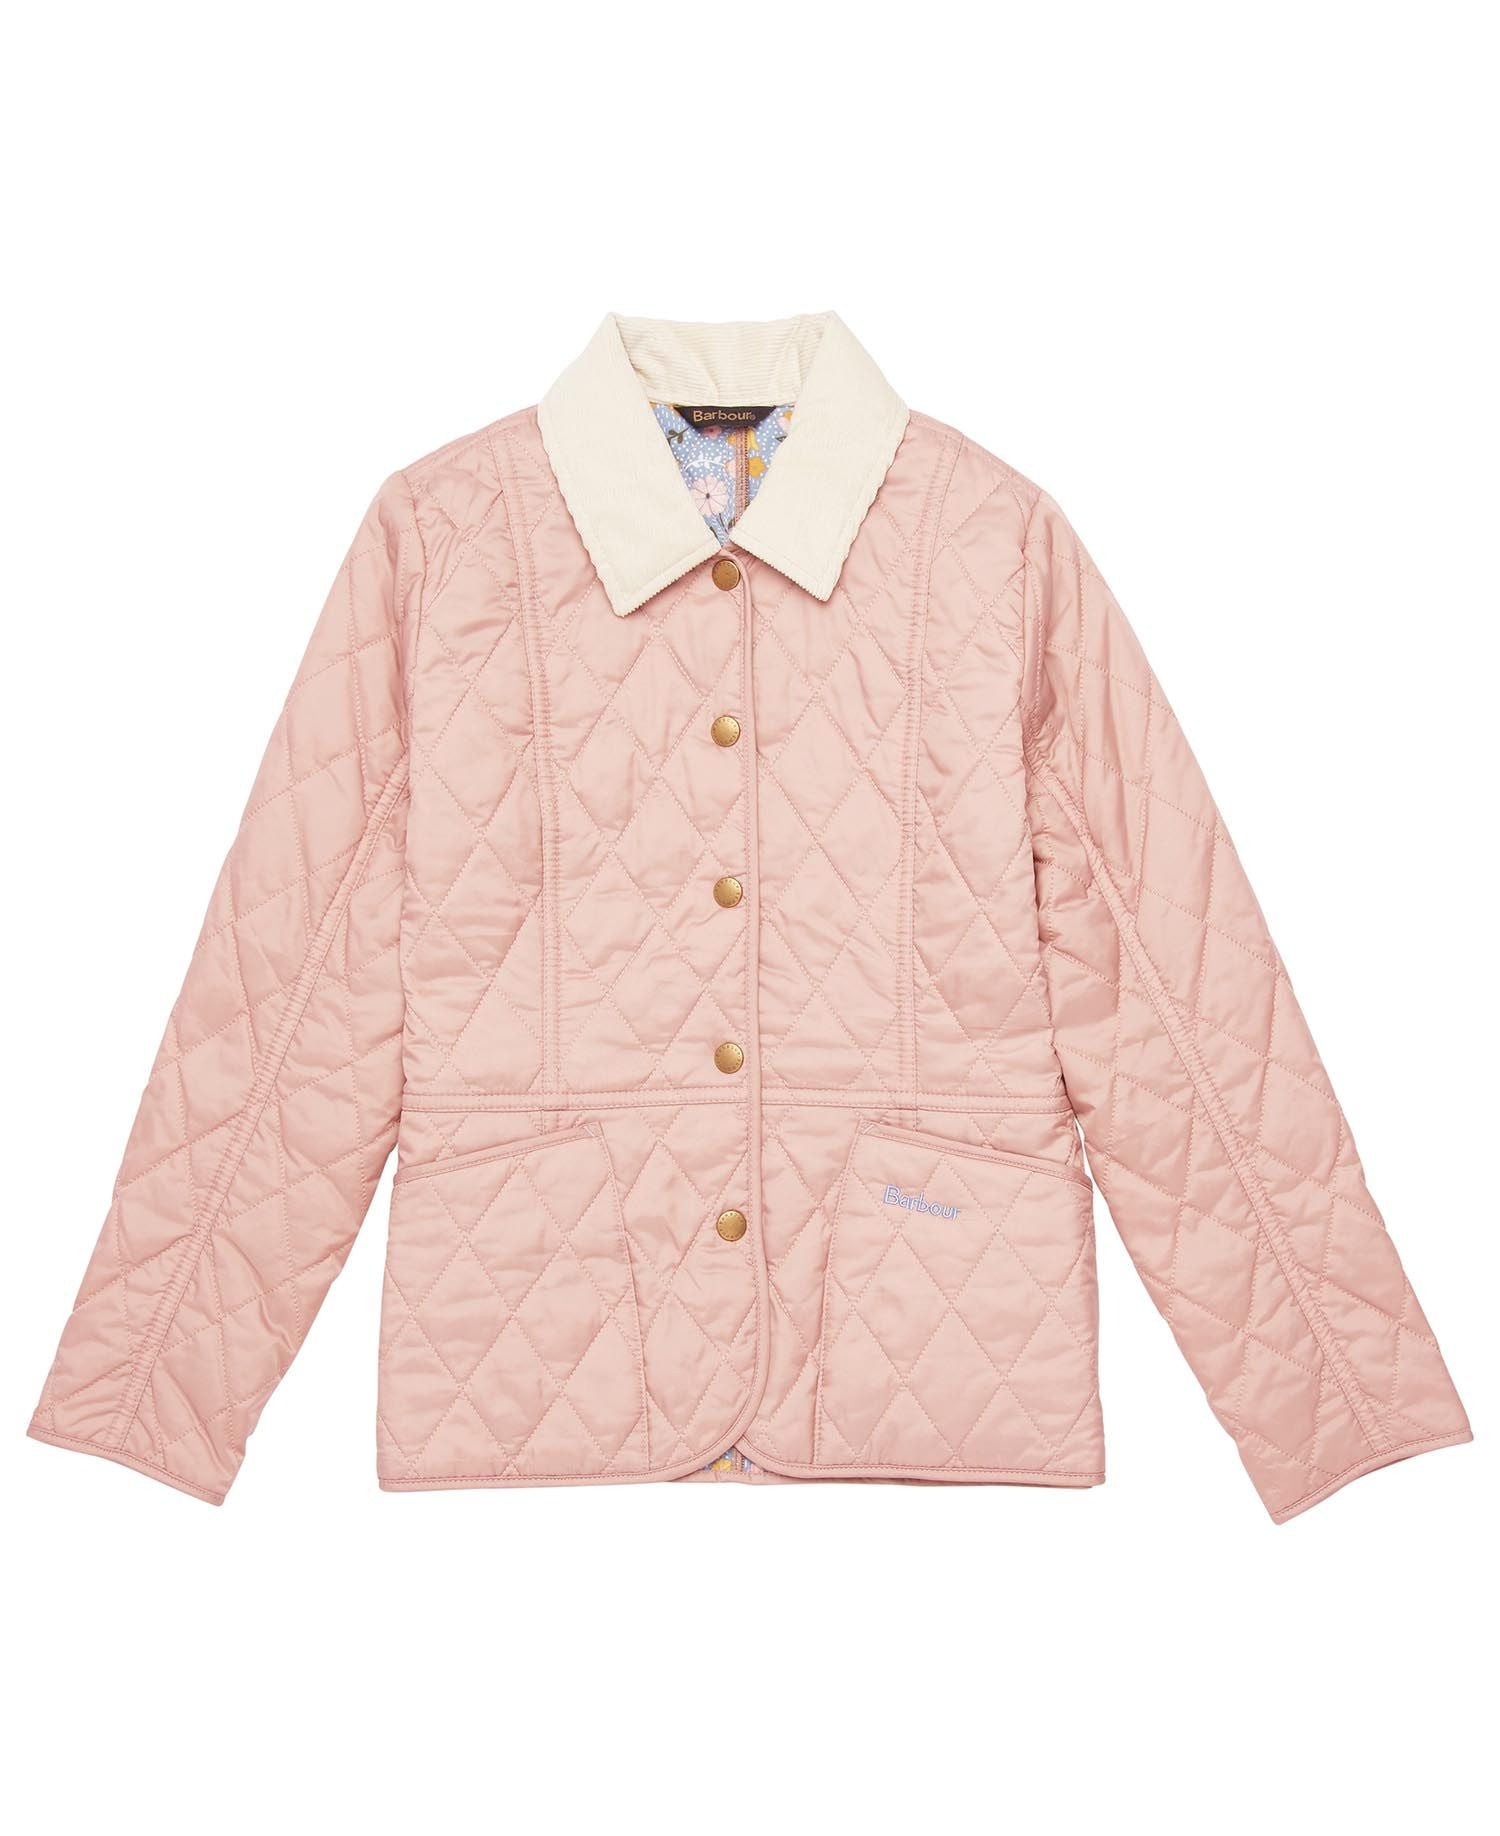 Barbour Girls Printed Liddesdale Quilted Jacket - SALE